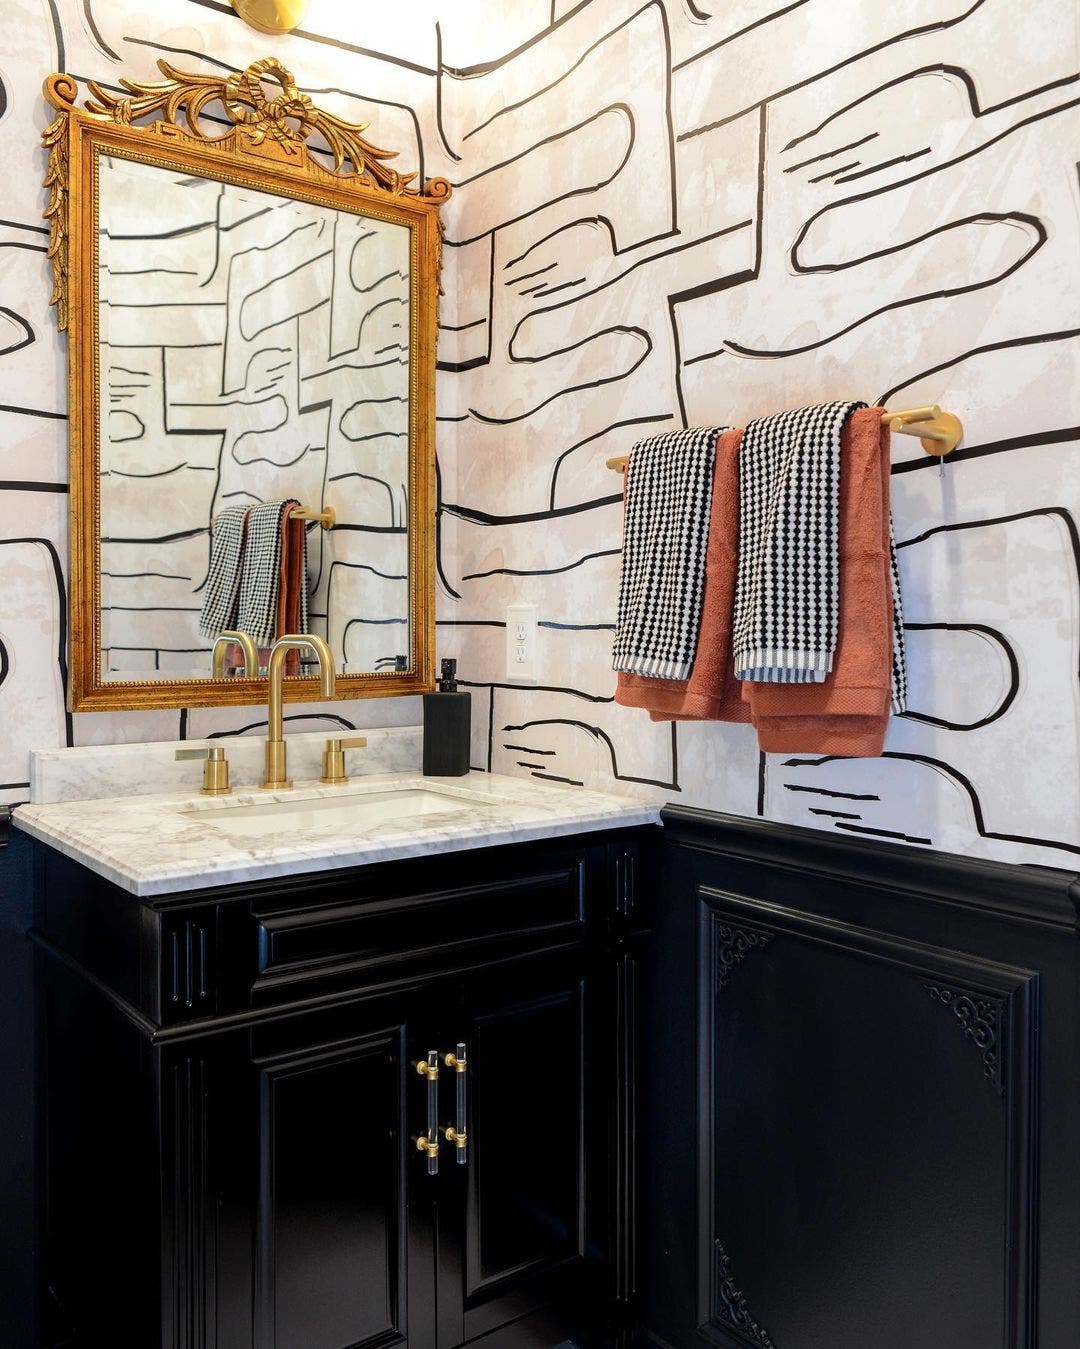 Bathroom Remodel Ideas and Trends in 2021